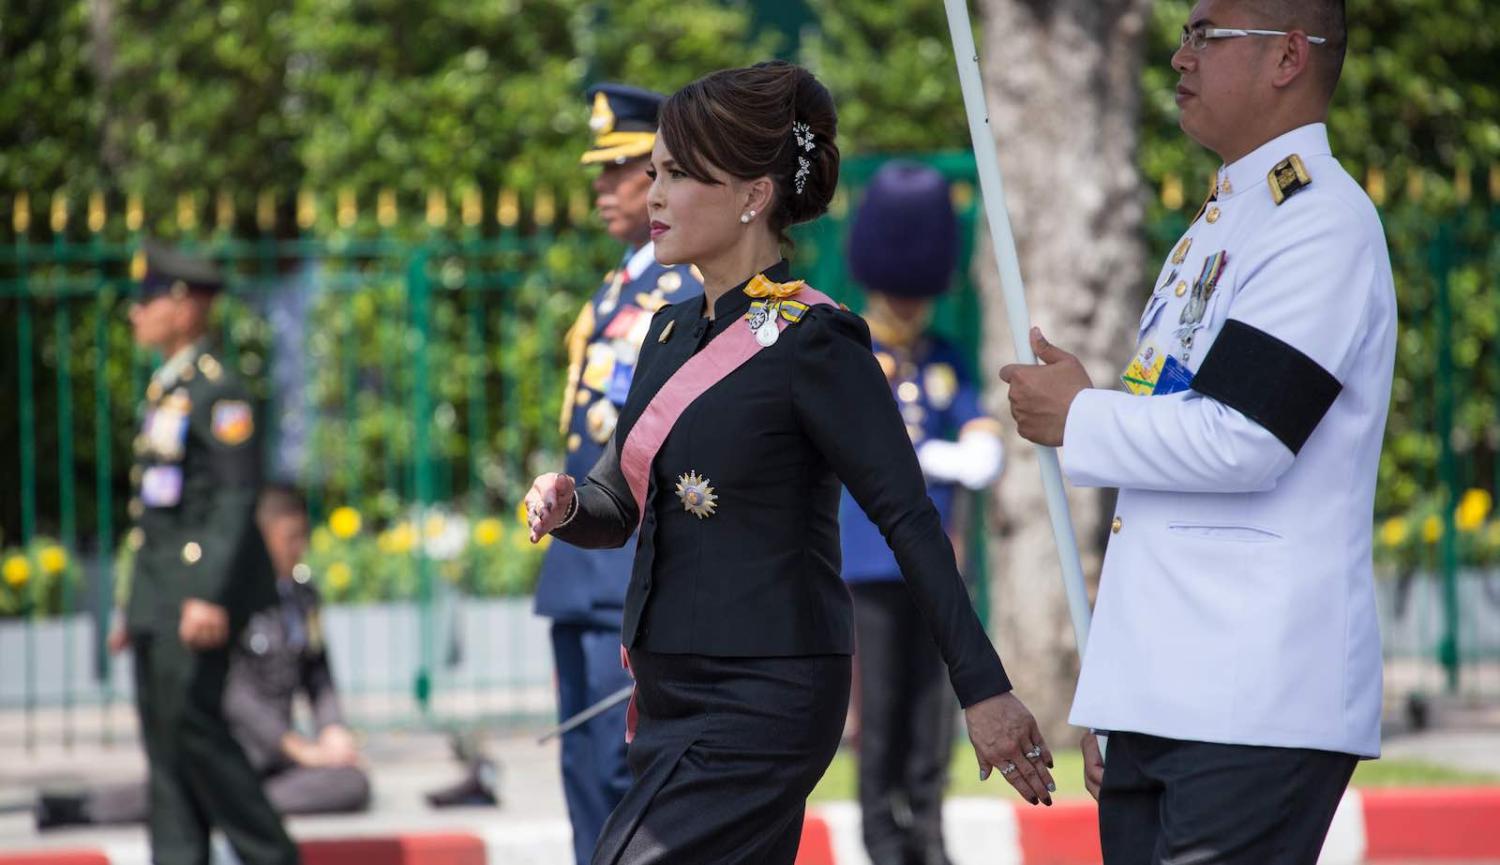 Thailand’s Princess Ubolratana, here in 2017, was announced on Friday as a surprise candidate for prime minister (Photo: Guillaume Payen via Getty)